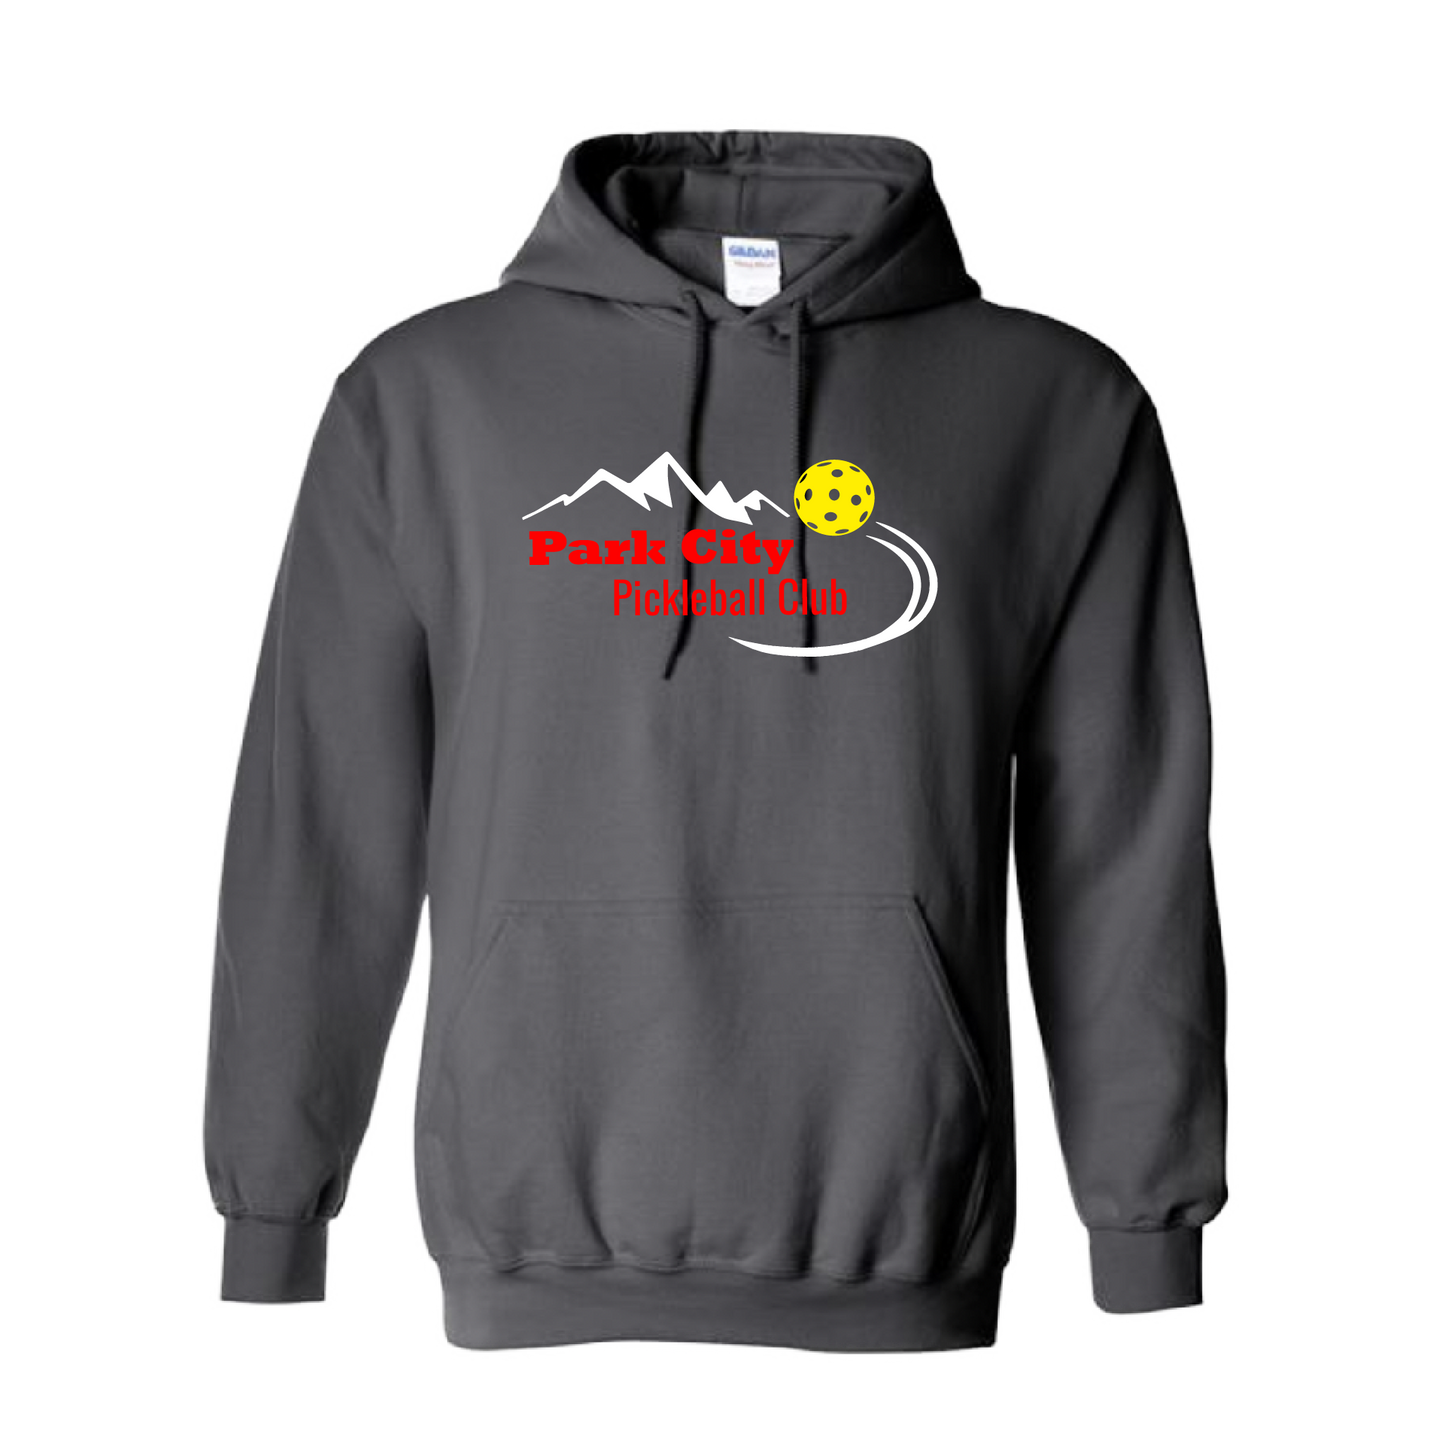 Pickleball Design: Park City Pickleball Club (red words)  Unisex Hooded Sweatshirt: Moisture-wicking, double-lined hood, front pouch pocket.  This unisex hooded sweatshirt is ultra comfortable and soft. Stay warm on the Pickleball courts while being that hit with this one of kind design.